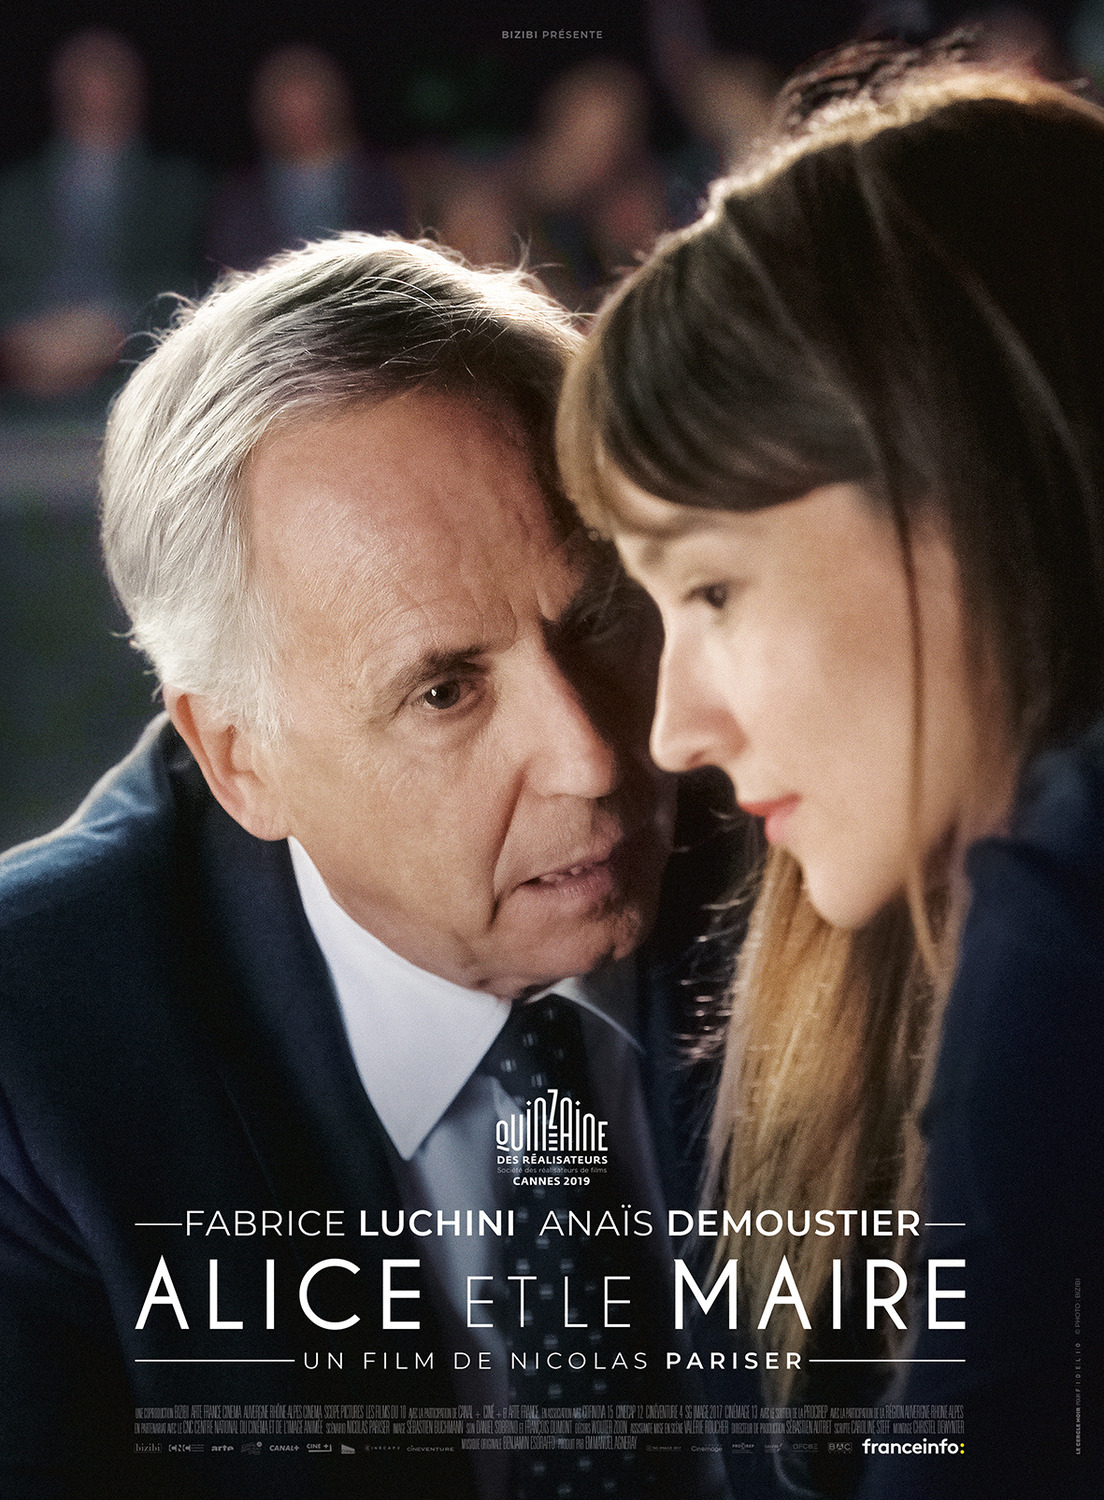 Extra Large Movie Poster Image for Alice et le maire 